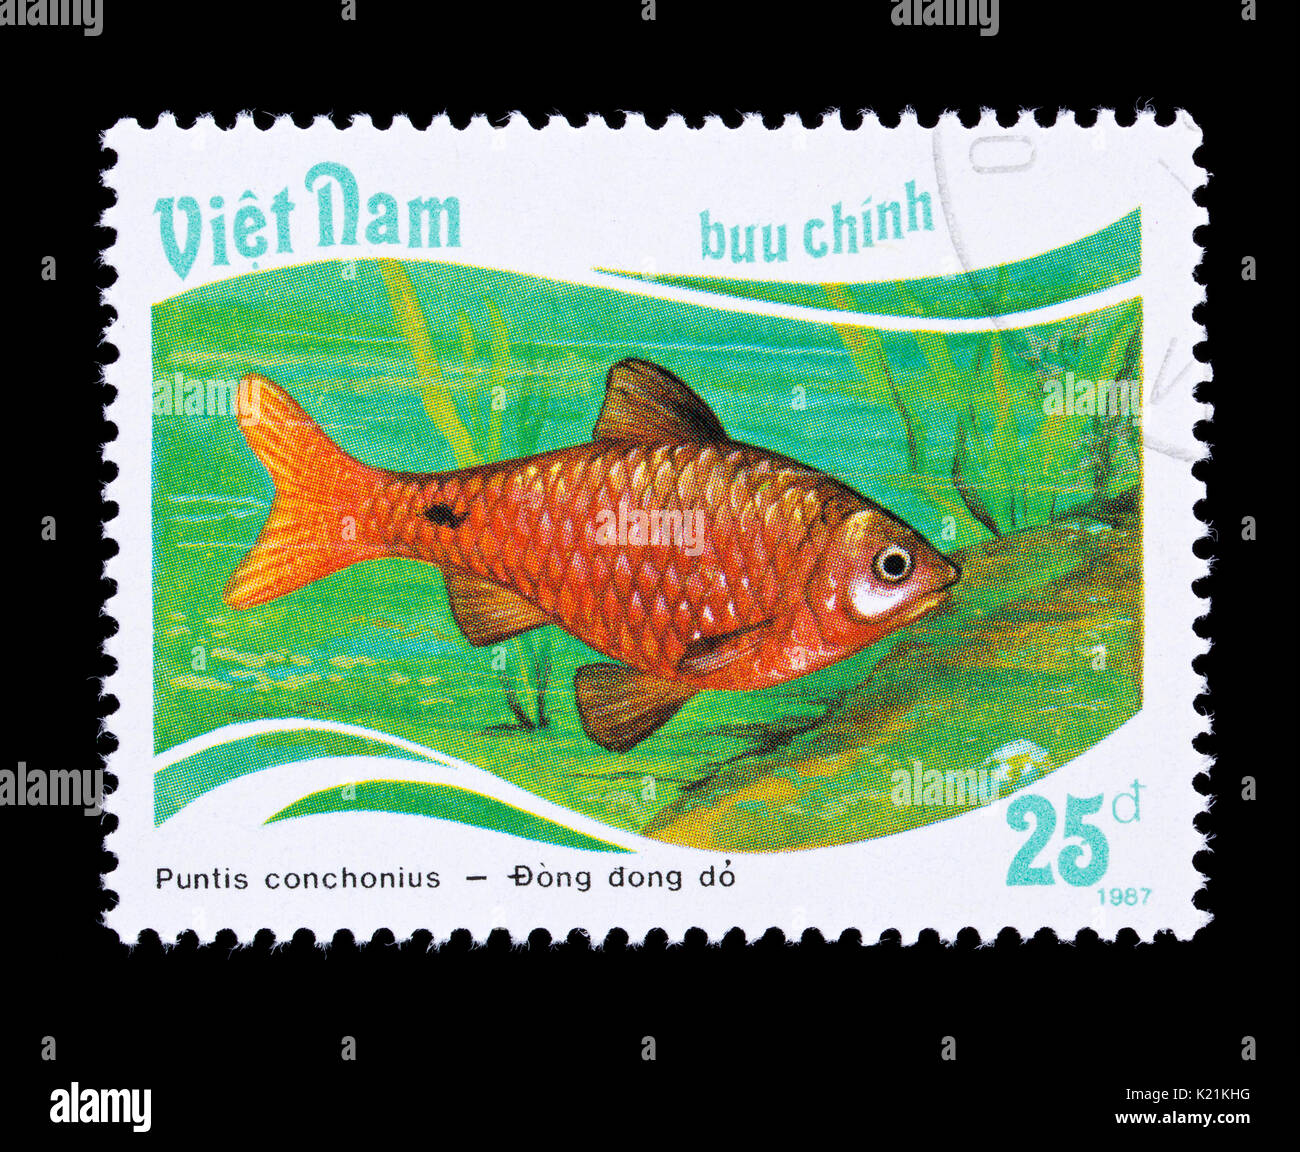 Postage stamp from Vietnam depicting a rosy barb (Pethia conchonius) Stock Photo